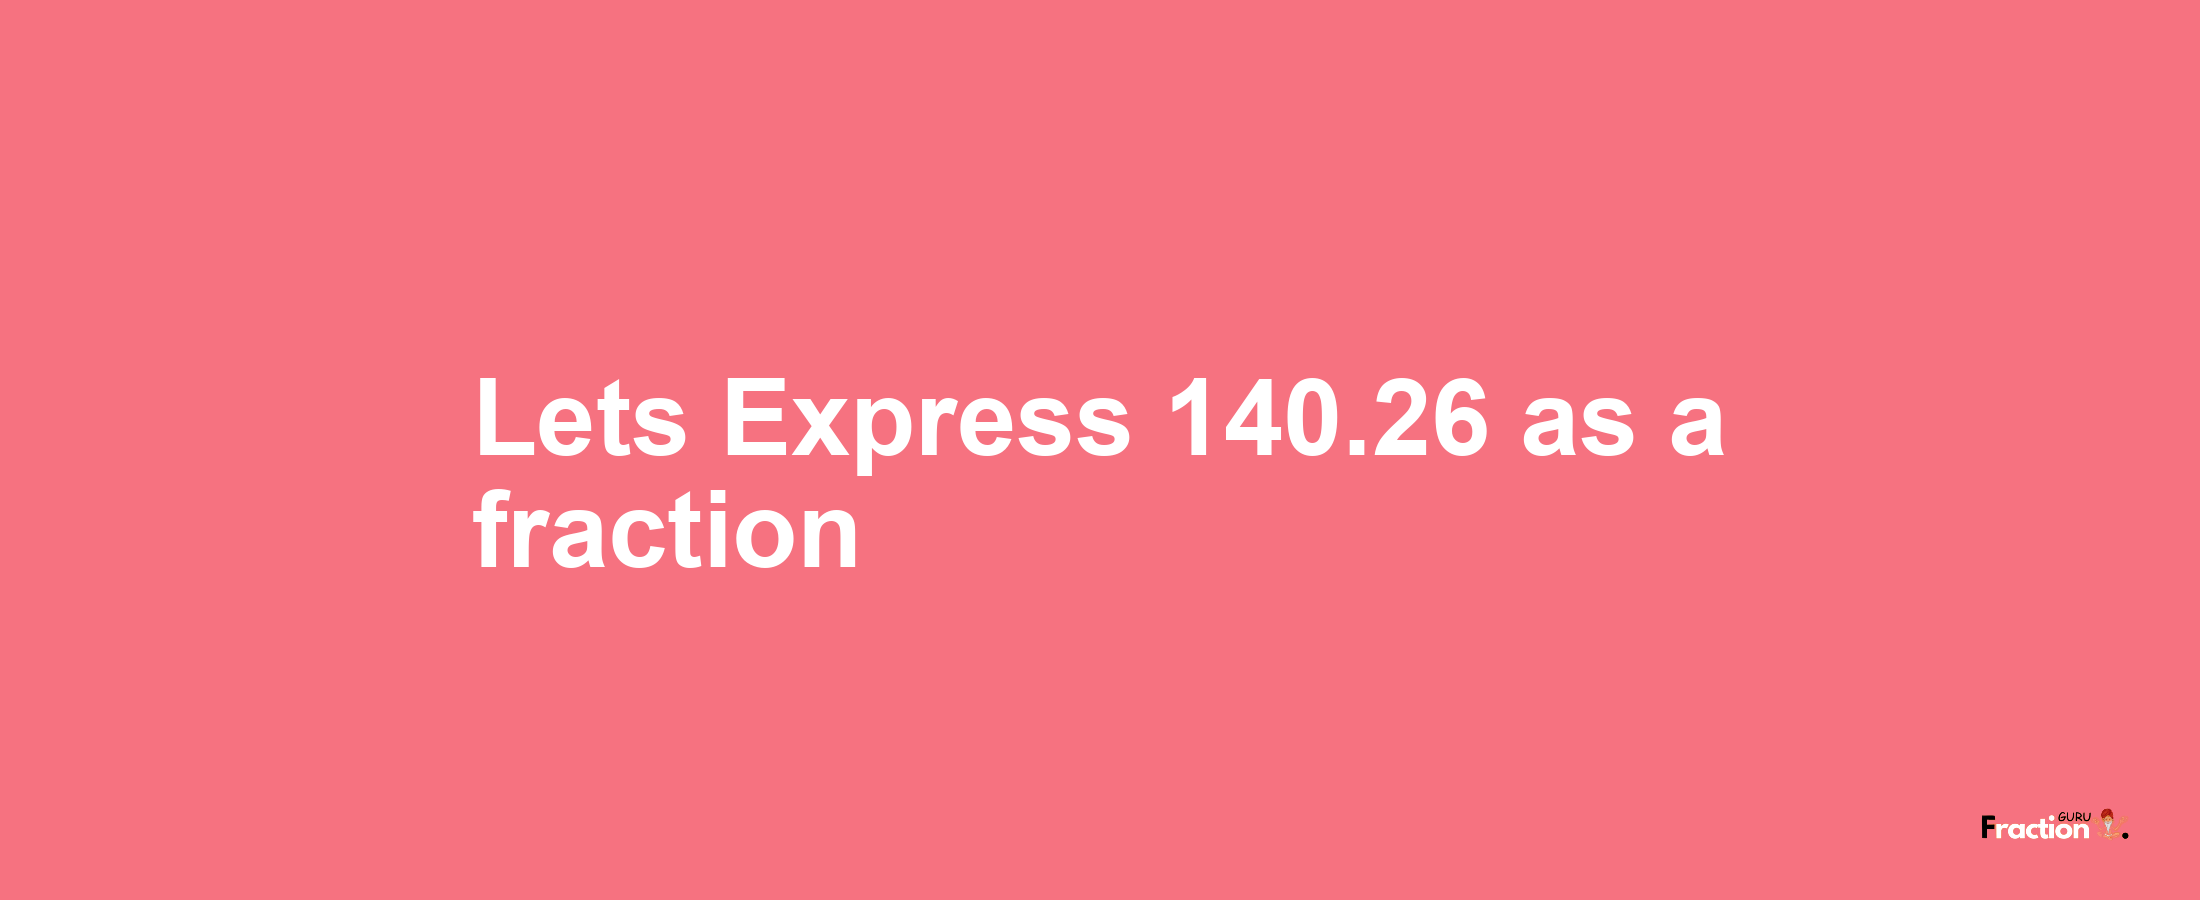 Lets Express 140.26 as afraction